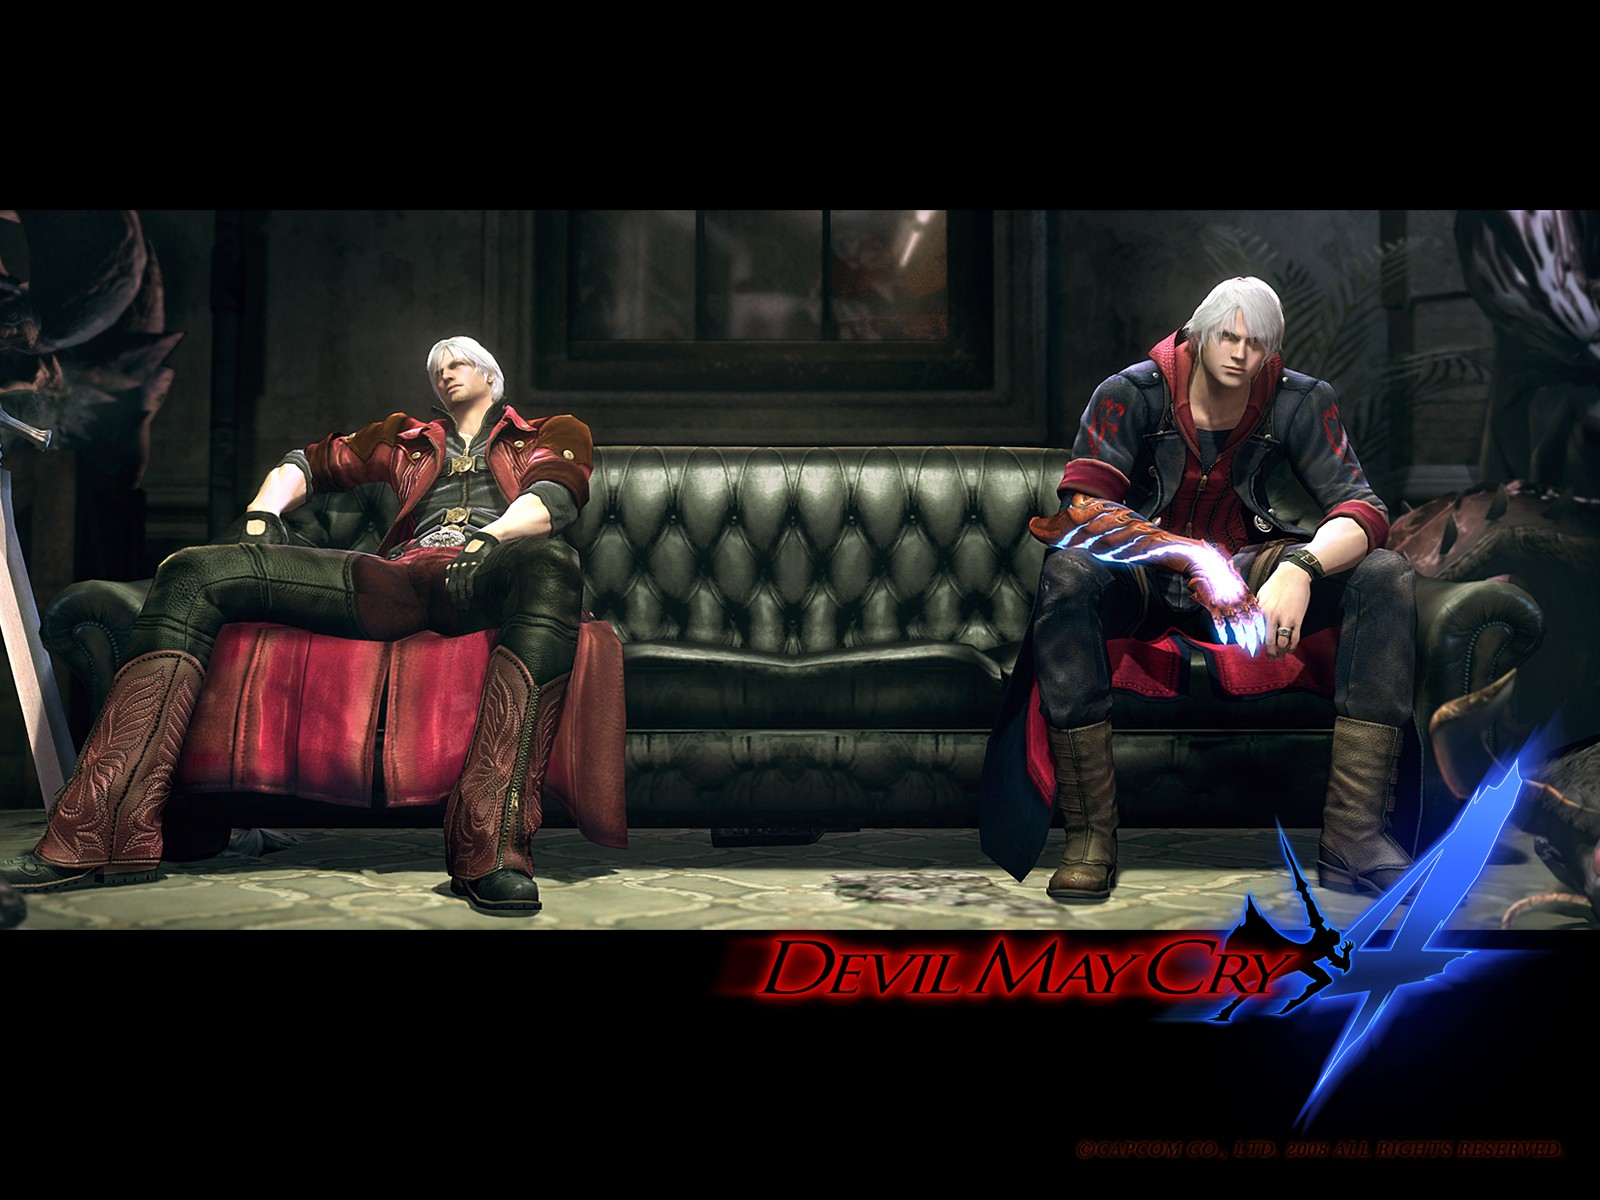 To7cy8woco8 S1600 Devil May Cry Wallpaper Wp20080222 Jpg